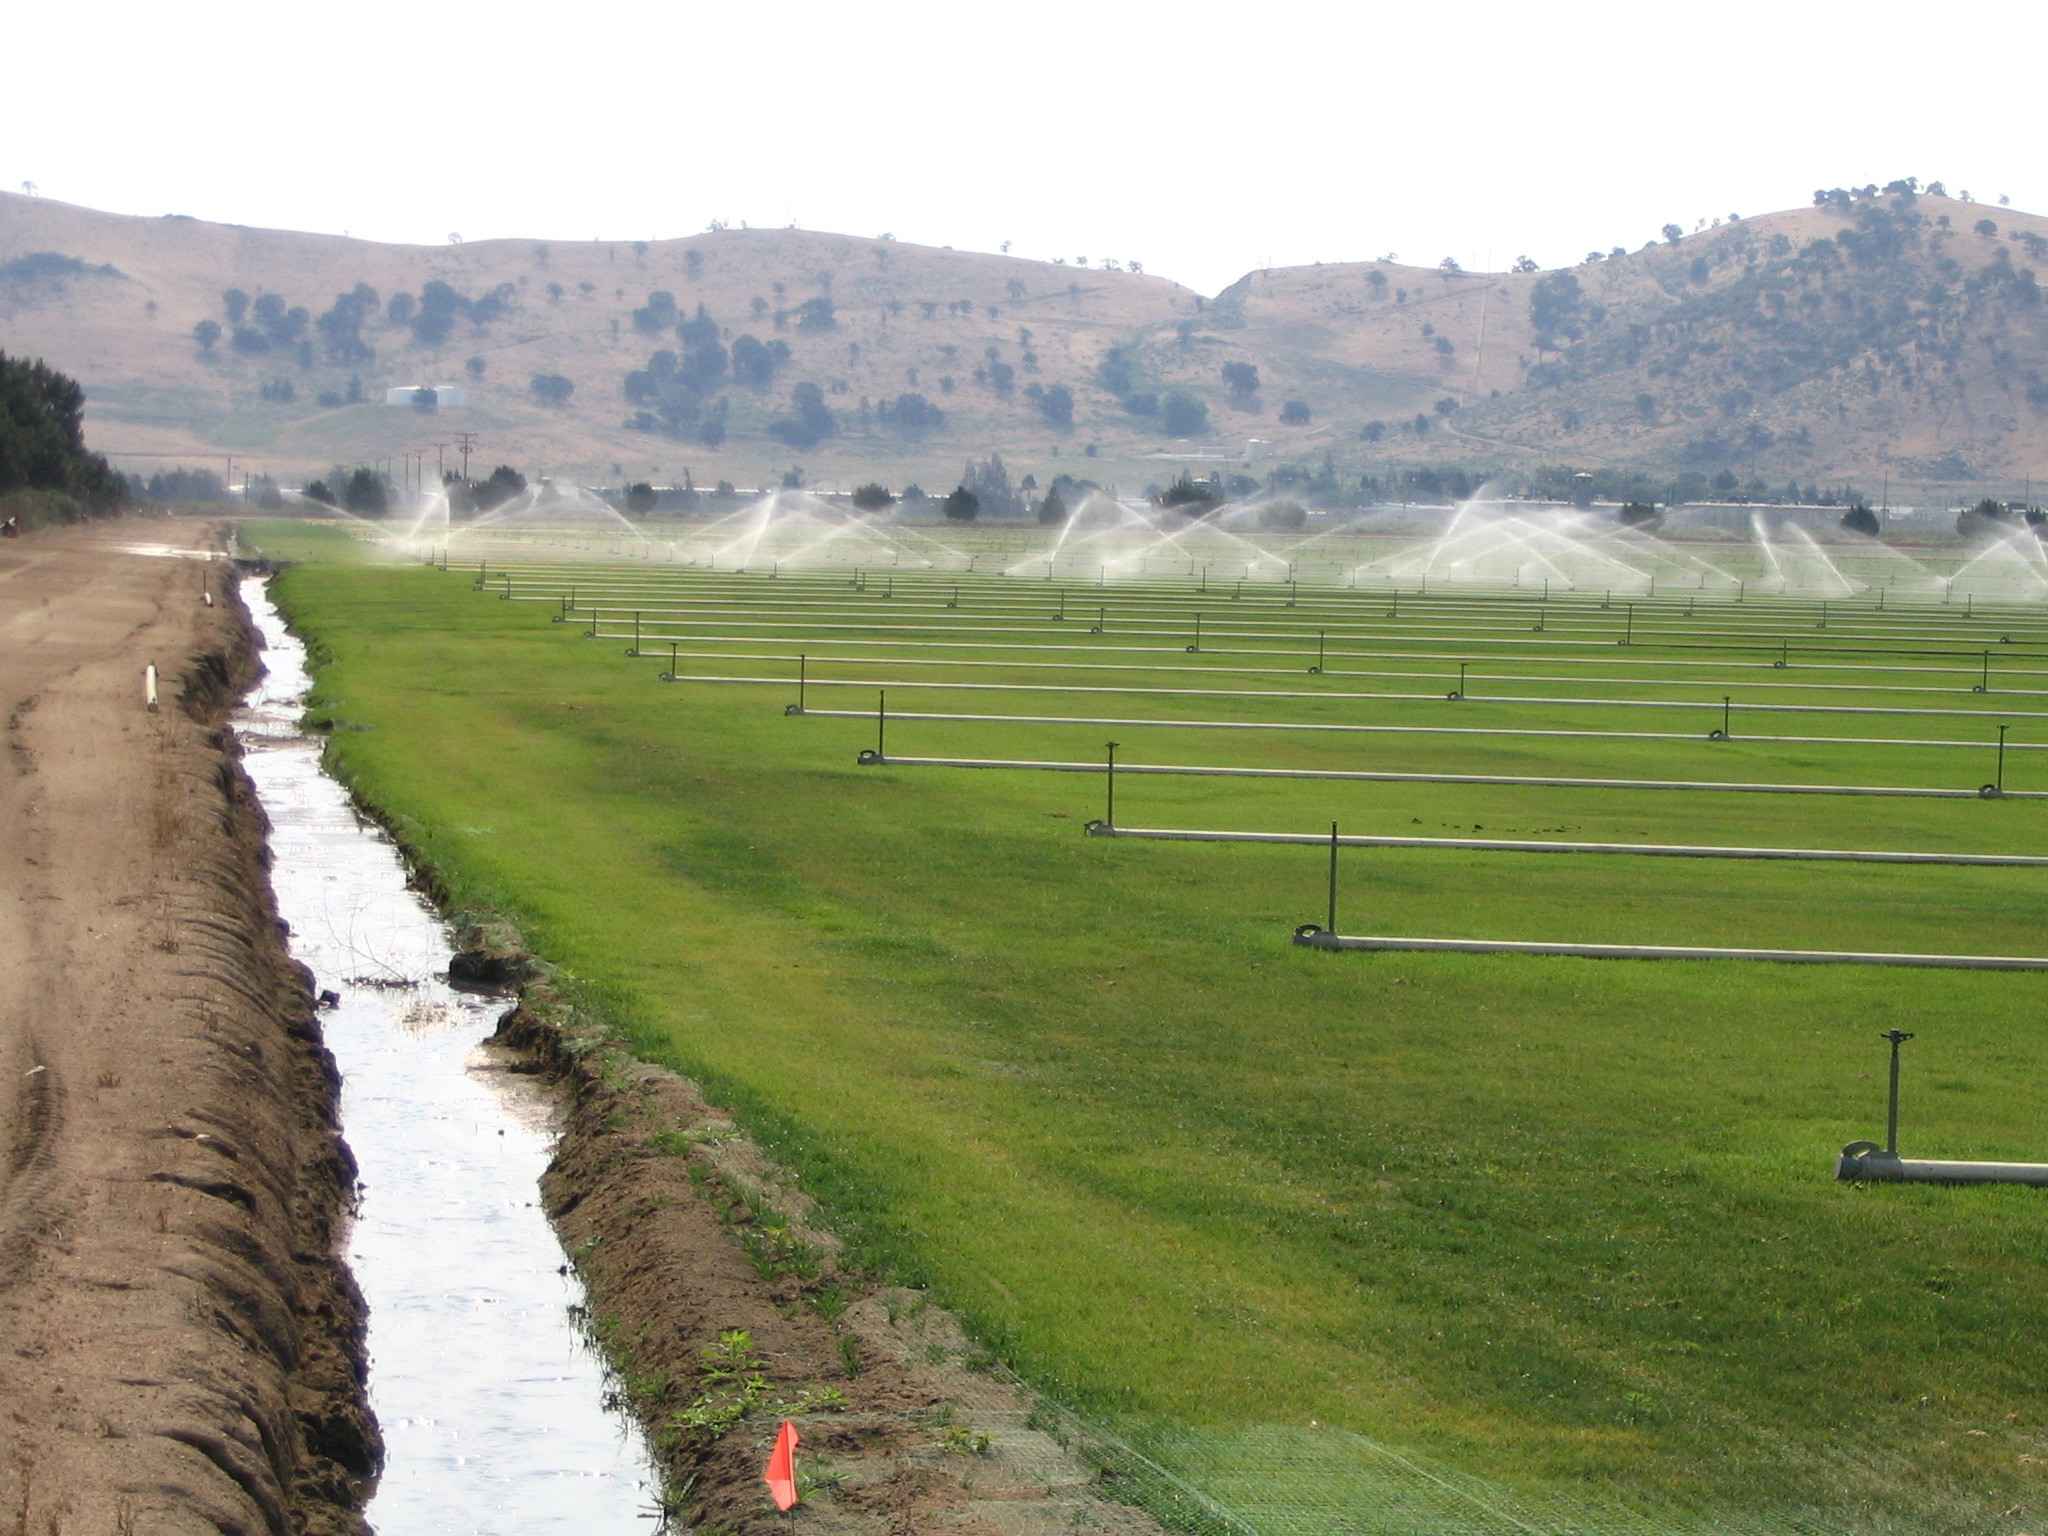 Irrigation canal along a green farm field with fields being irrigated in the distance